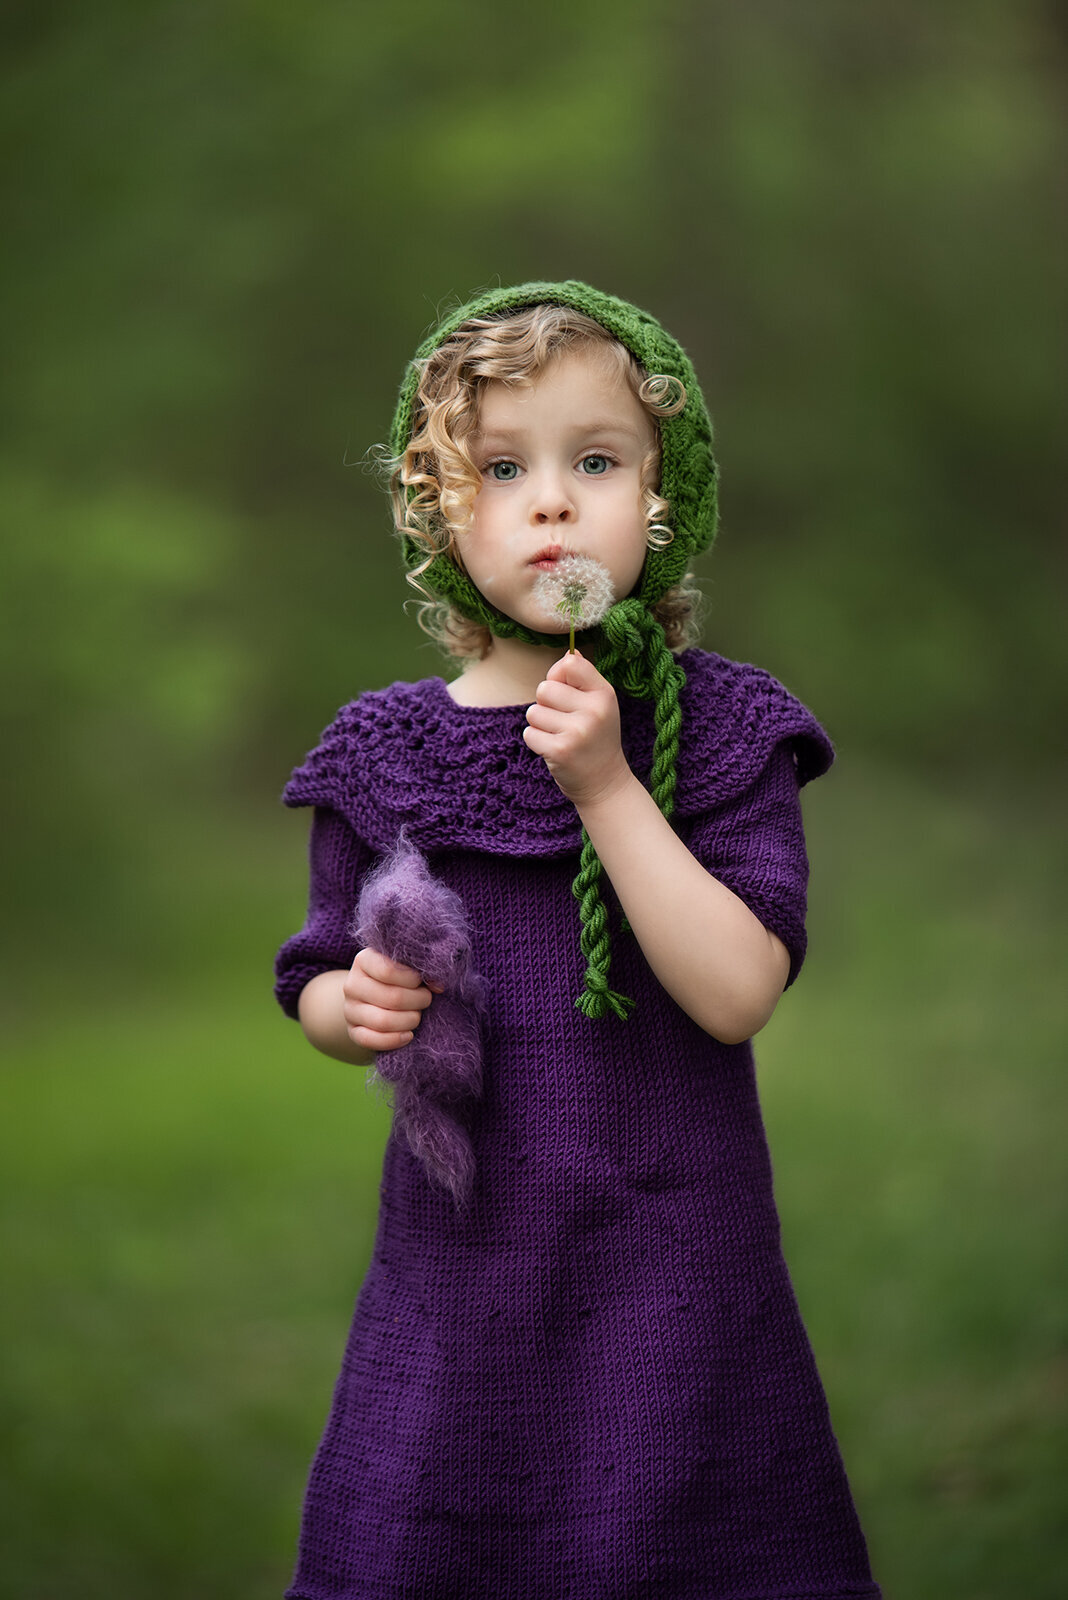 girl blowing a dandelion in purple and green outfit